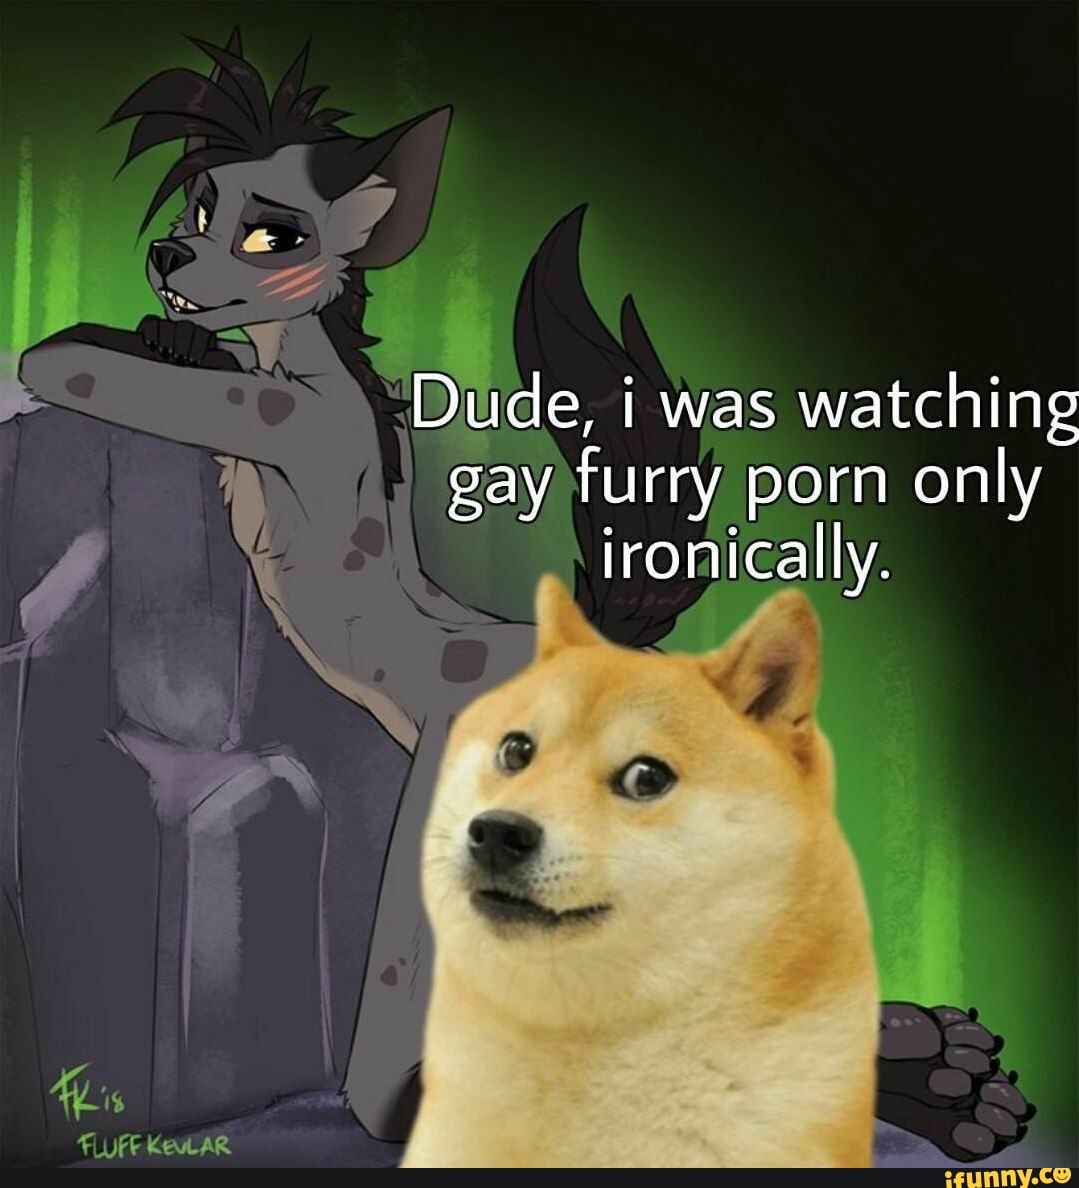 Dude, i was watching gay furry porn only ironically. 